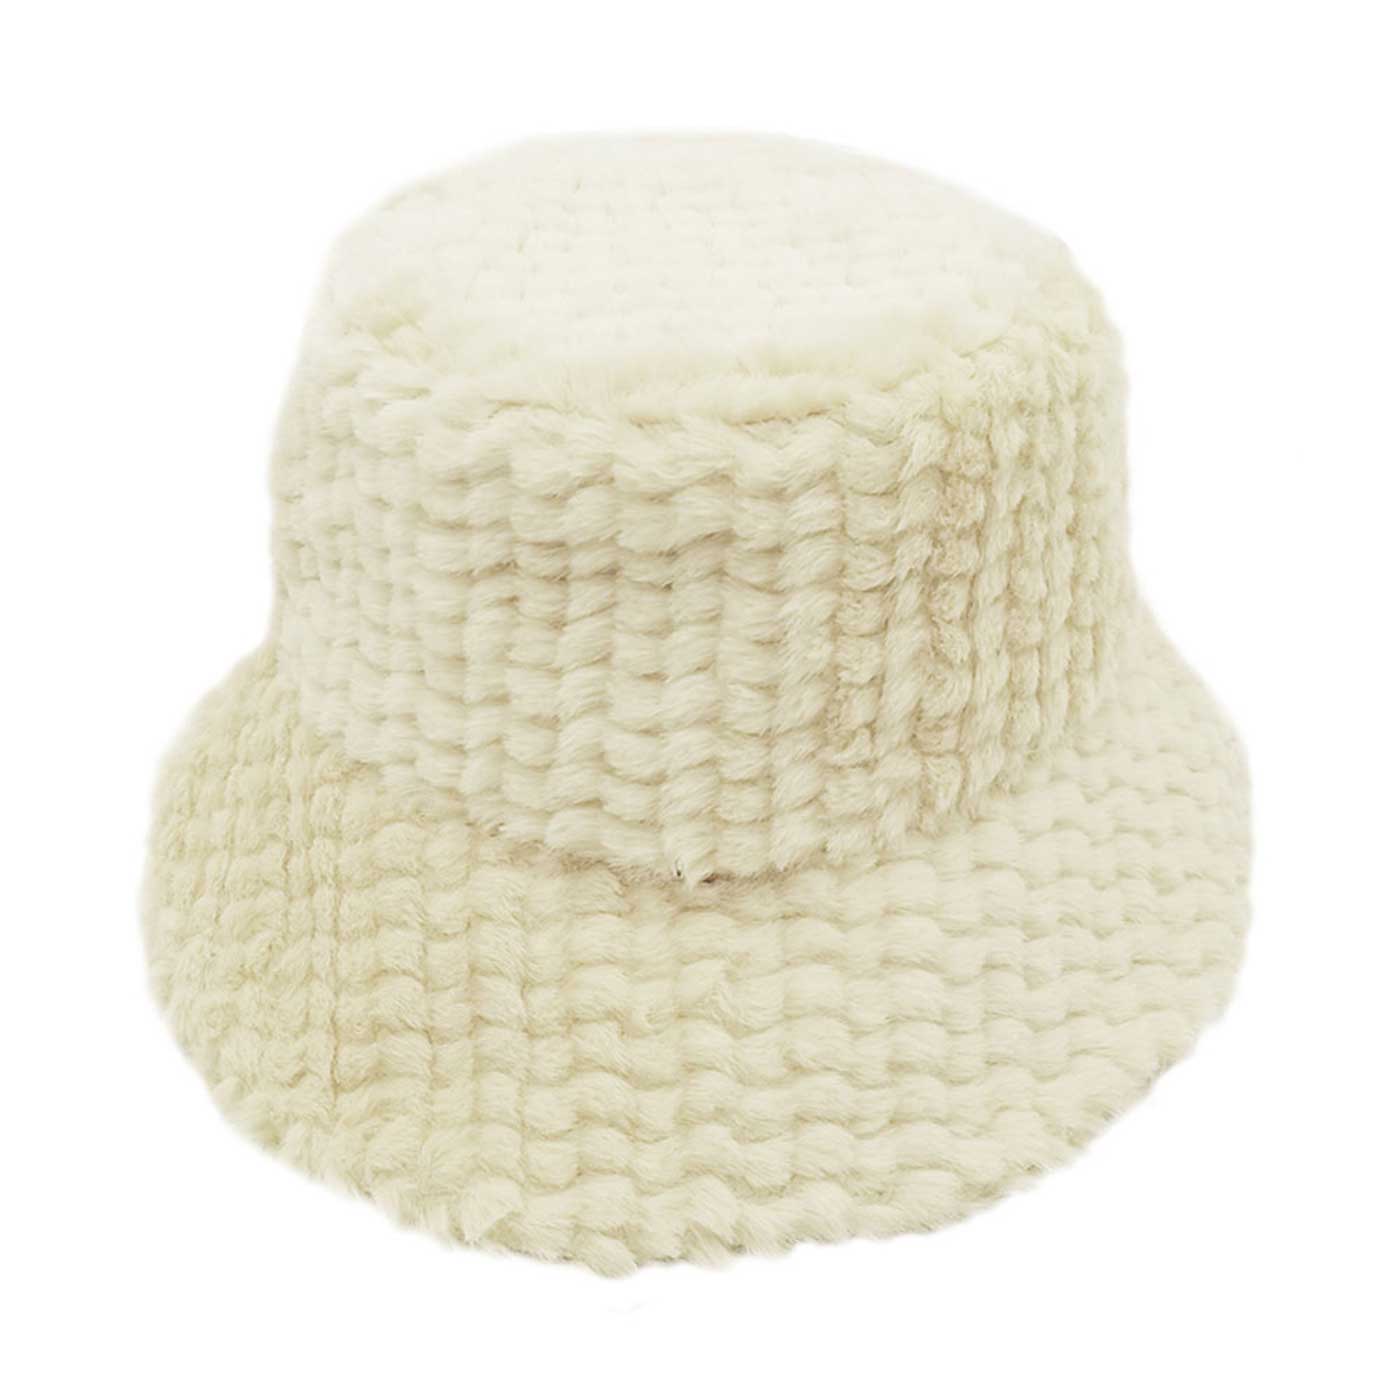 Ivory Fuzzy Faux Fur Bucket Hat, is a beautiful addition to your attire. before running out the door into the cool air, you’ll want to reach for this toasty bucket hat to keep you incredibly warm. Accessorize the fun way with this solid faux fur bucket hat, it's the autumnal touch you need to finish your outfit in style. Awesome winter gift accessory! Perfect Gift Birthday, Christmas, Stocking Stuffer, Secret Santa, Holiday, Anniversary, Valentine's Day, Loved One.